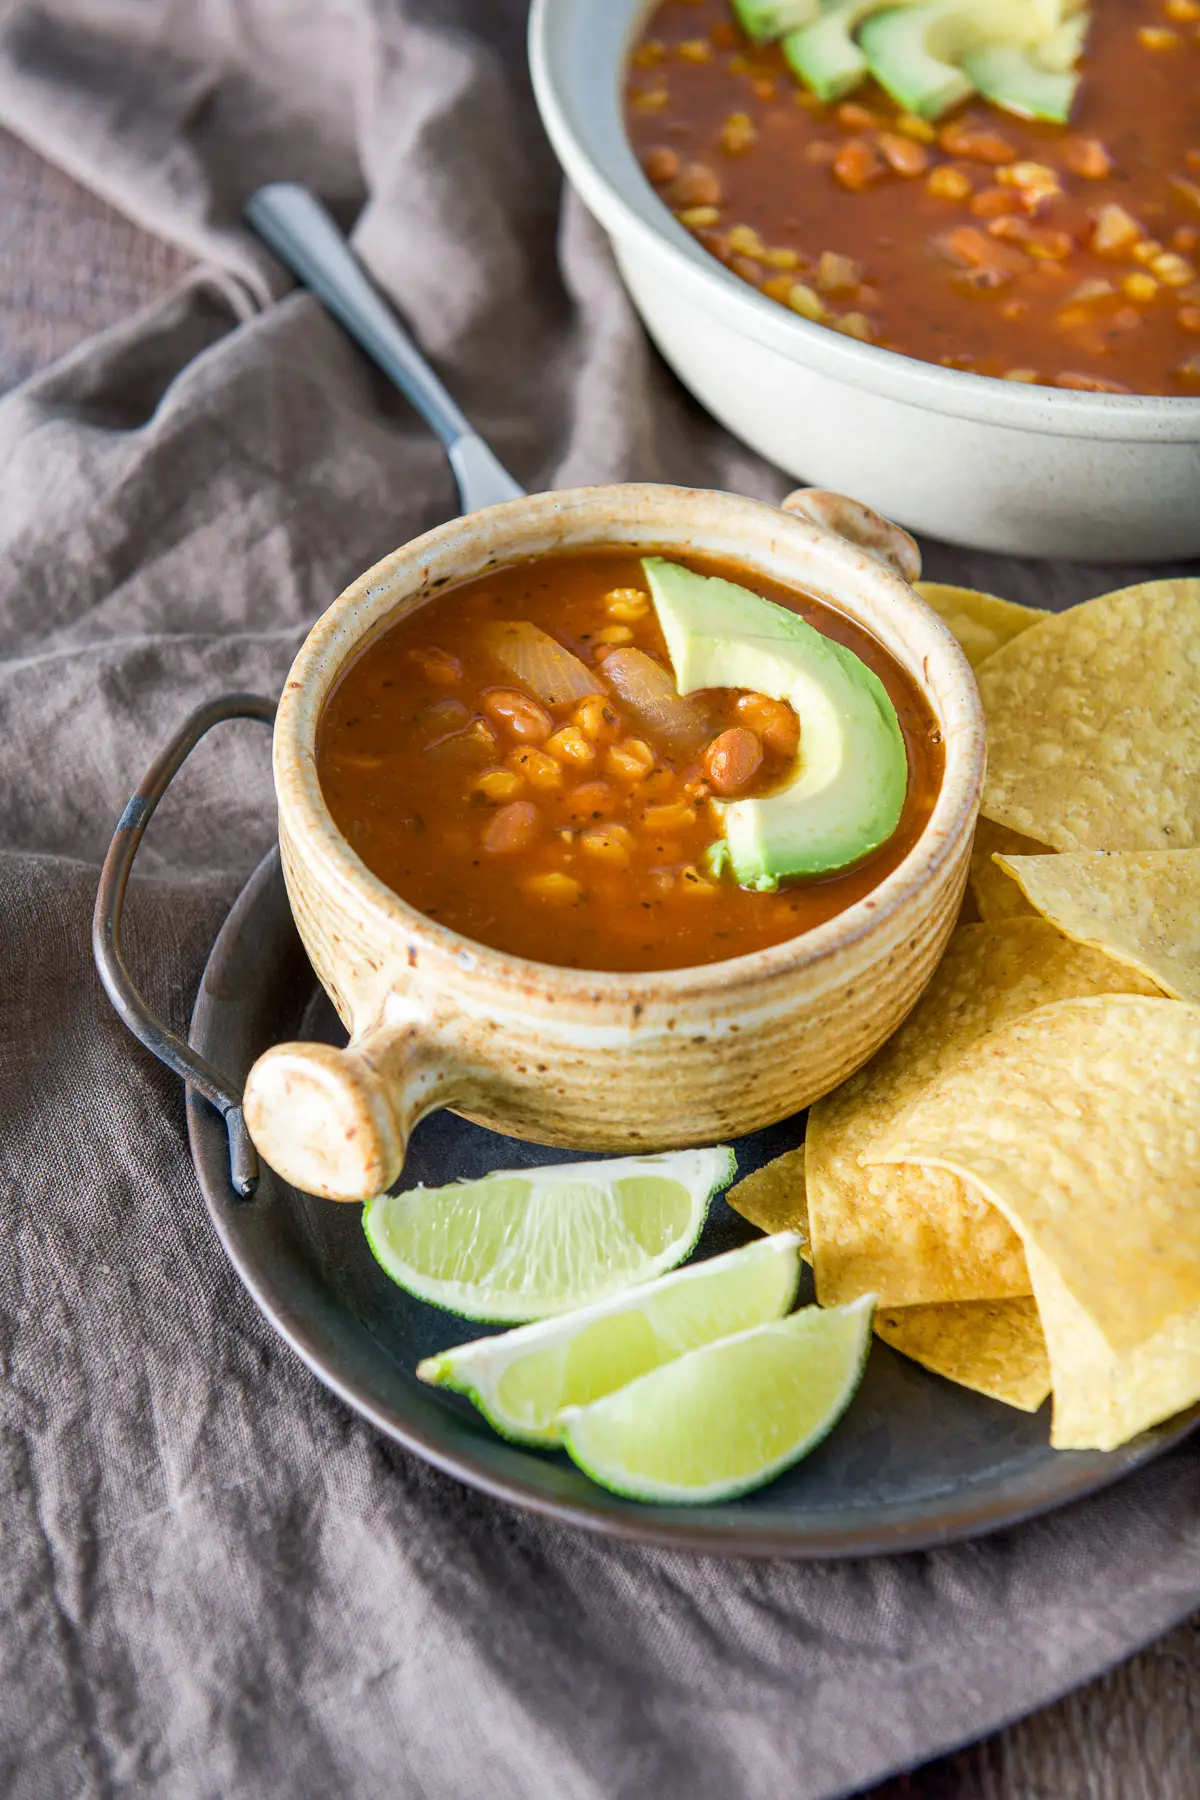 A tray with chips, lime wedges and a crock of soup with an avocado slice on top